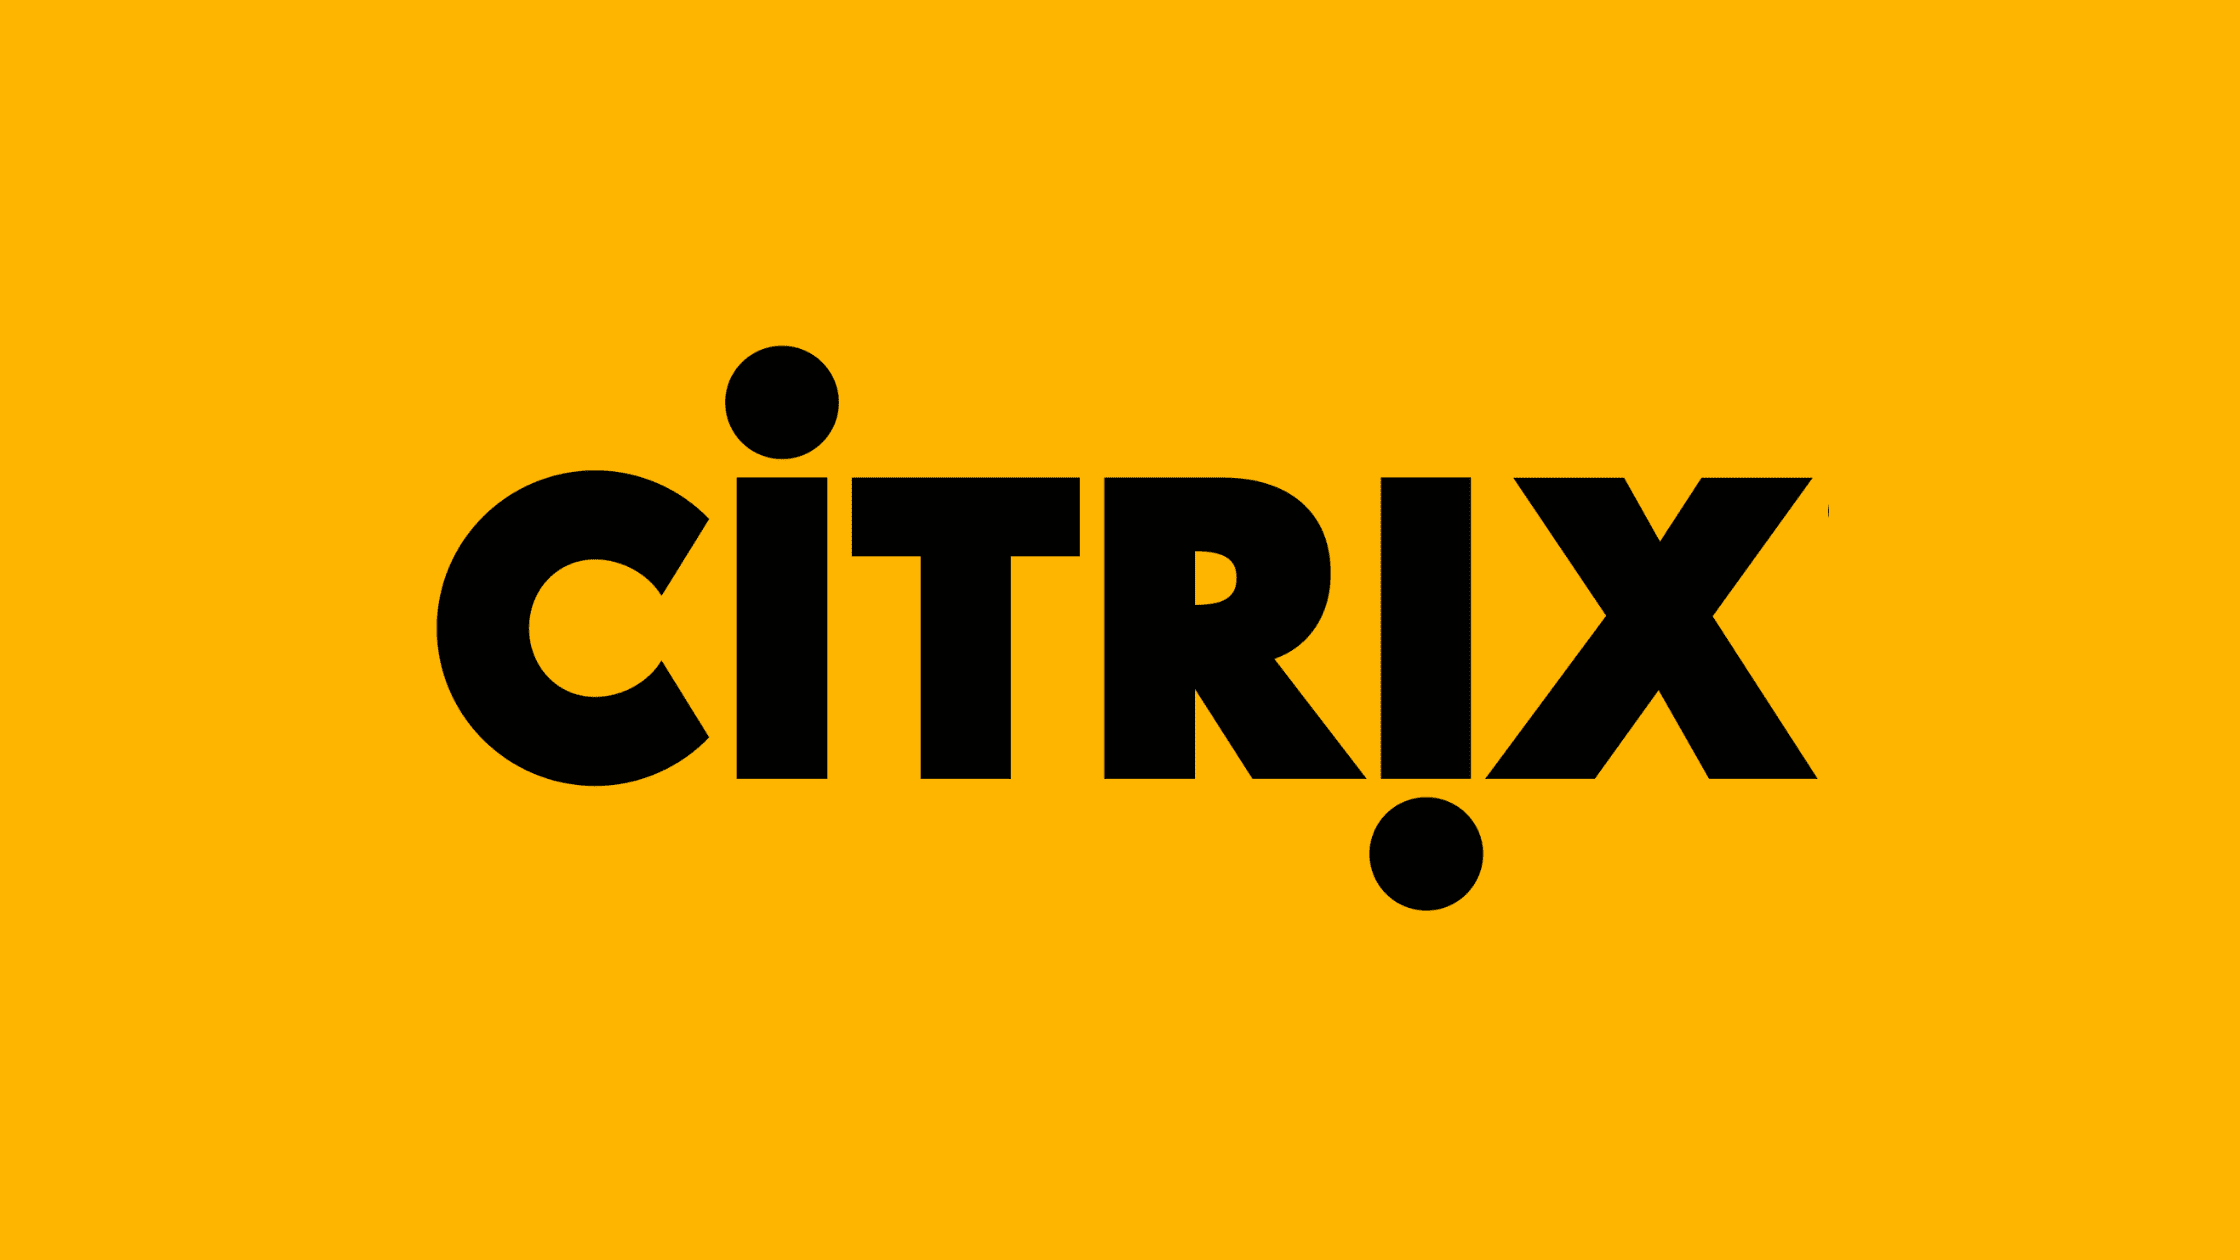 How To Fix Cve 2023 3519 An Unauthenticated Remote Code Execution Vulnerability In Citrix Products